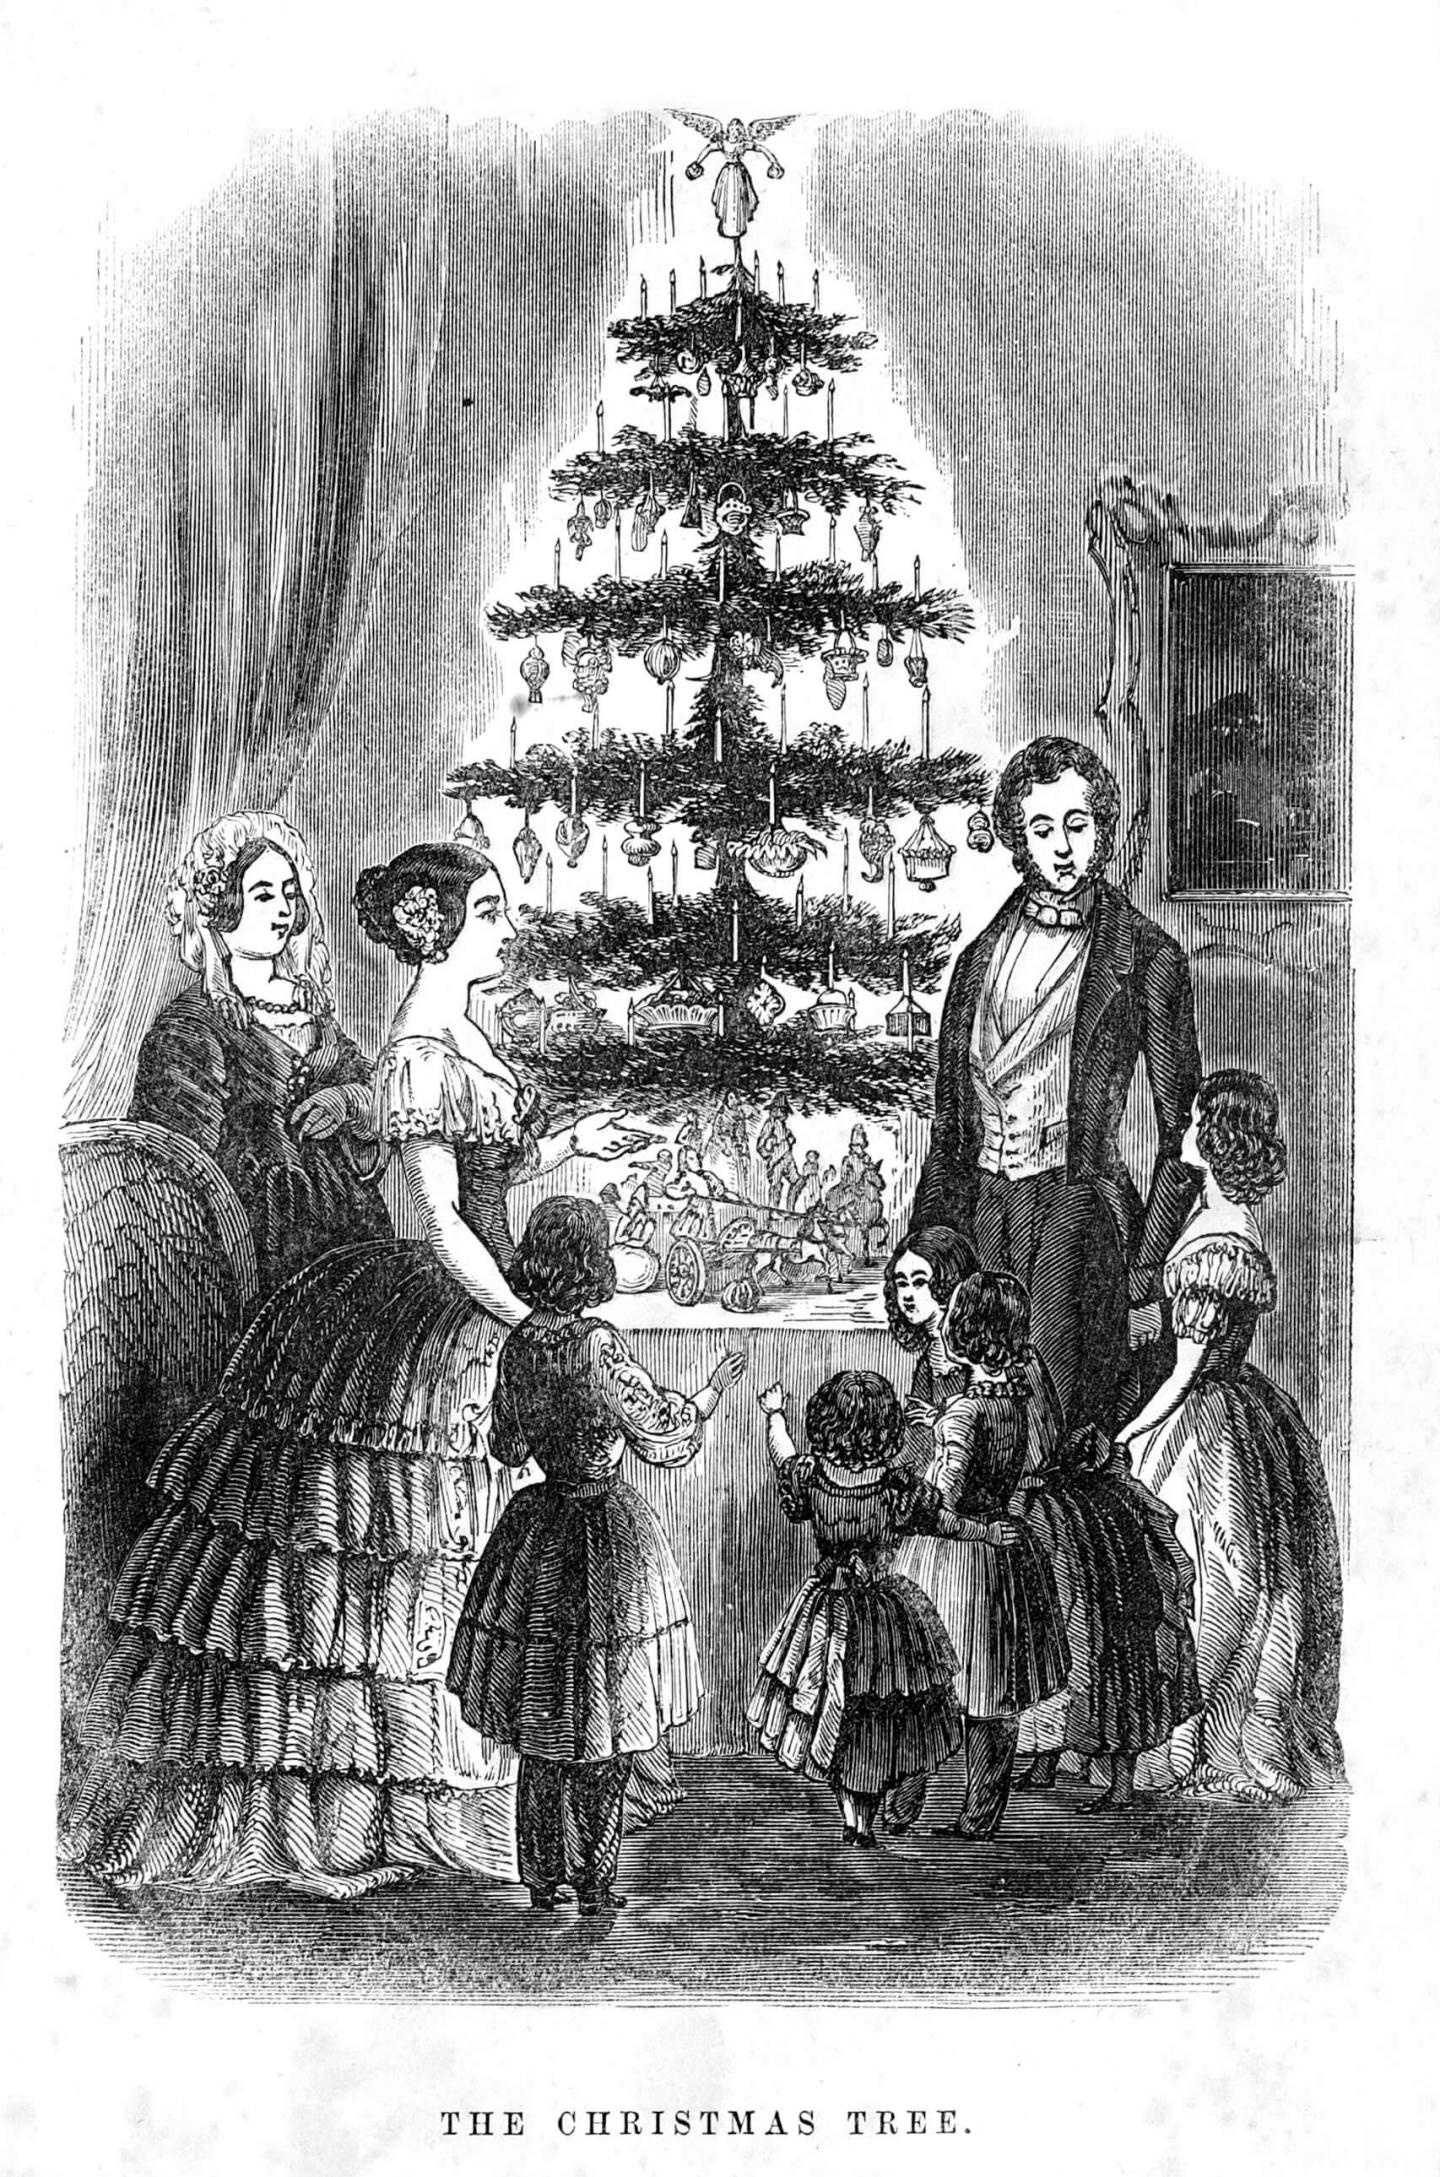 What Was Christmas Like In Victorian Times?